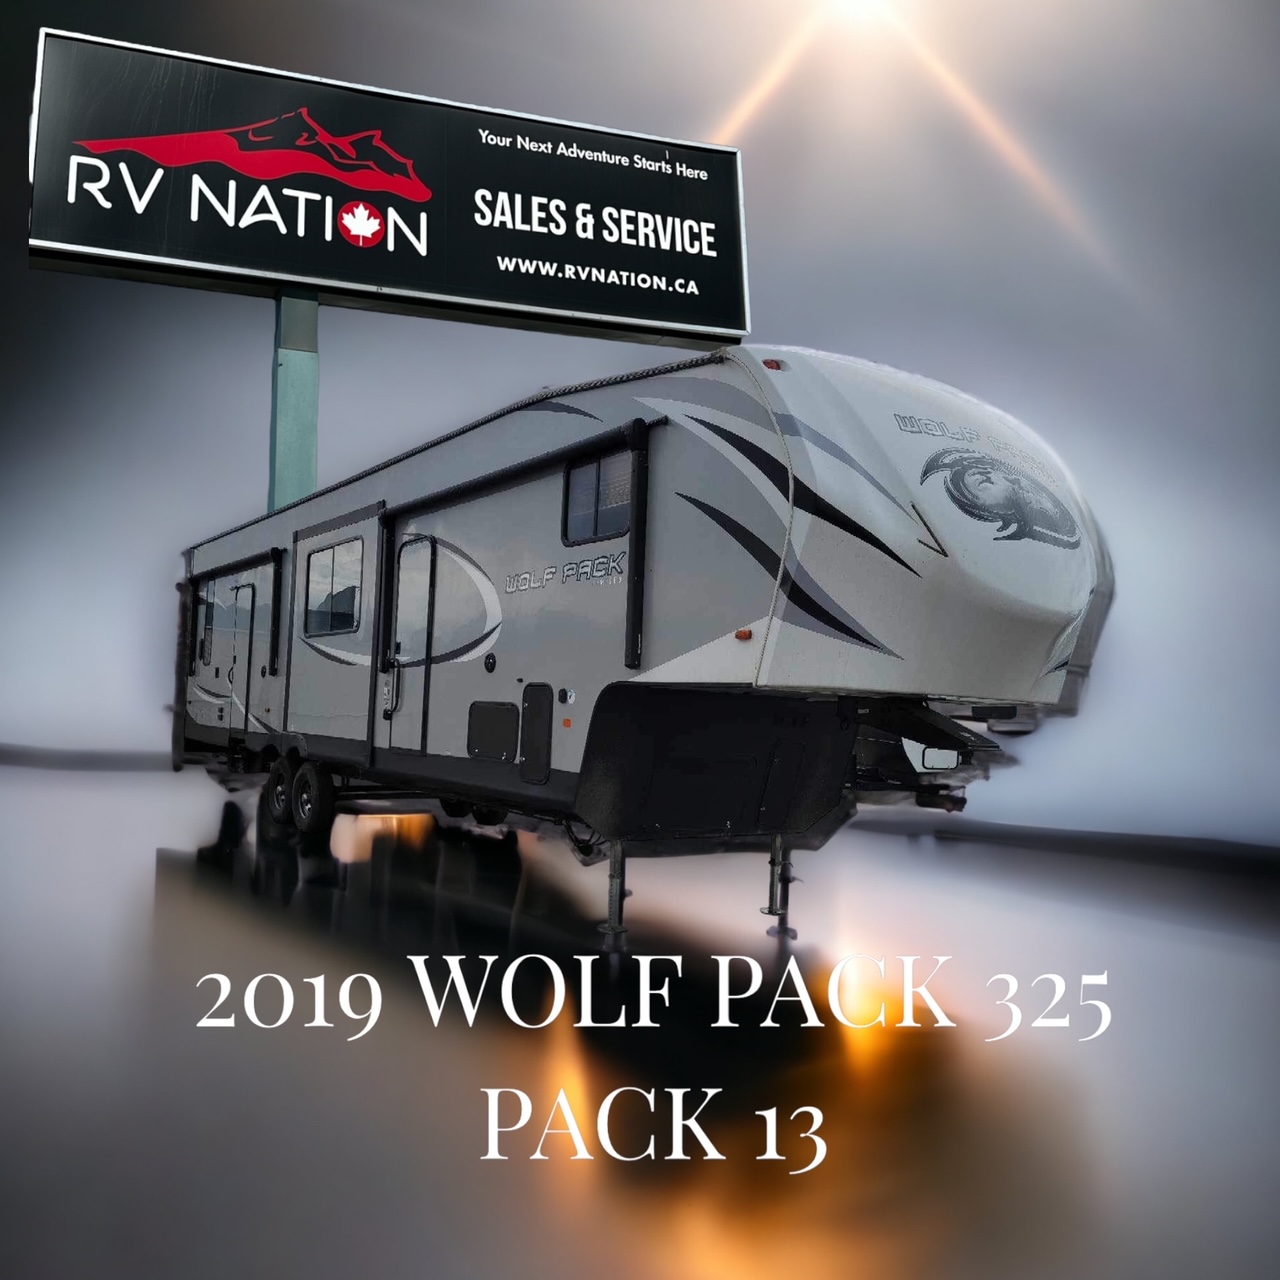 2019 WOLF PACK 325 PACK 13